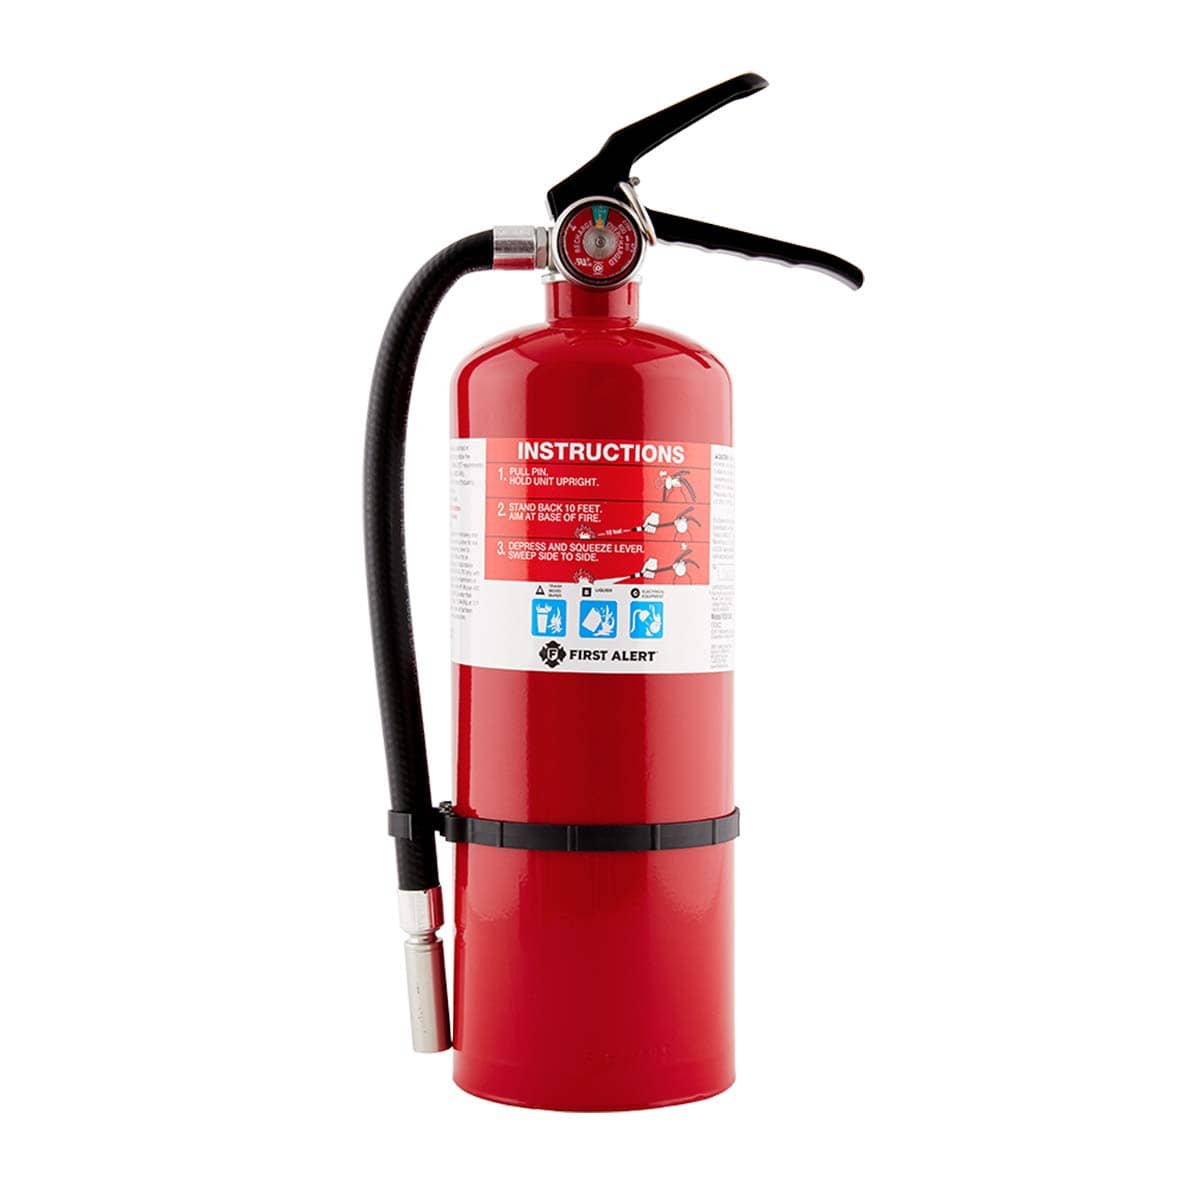 First Alert FE2A10GR best Fire Extinguisher for the home for fighting liquid electric and combustible fire.